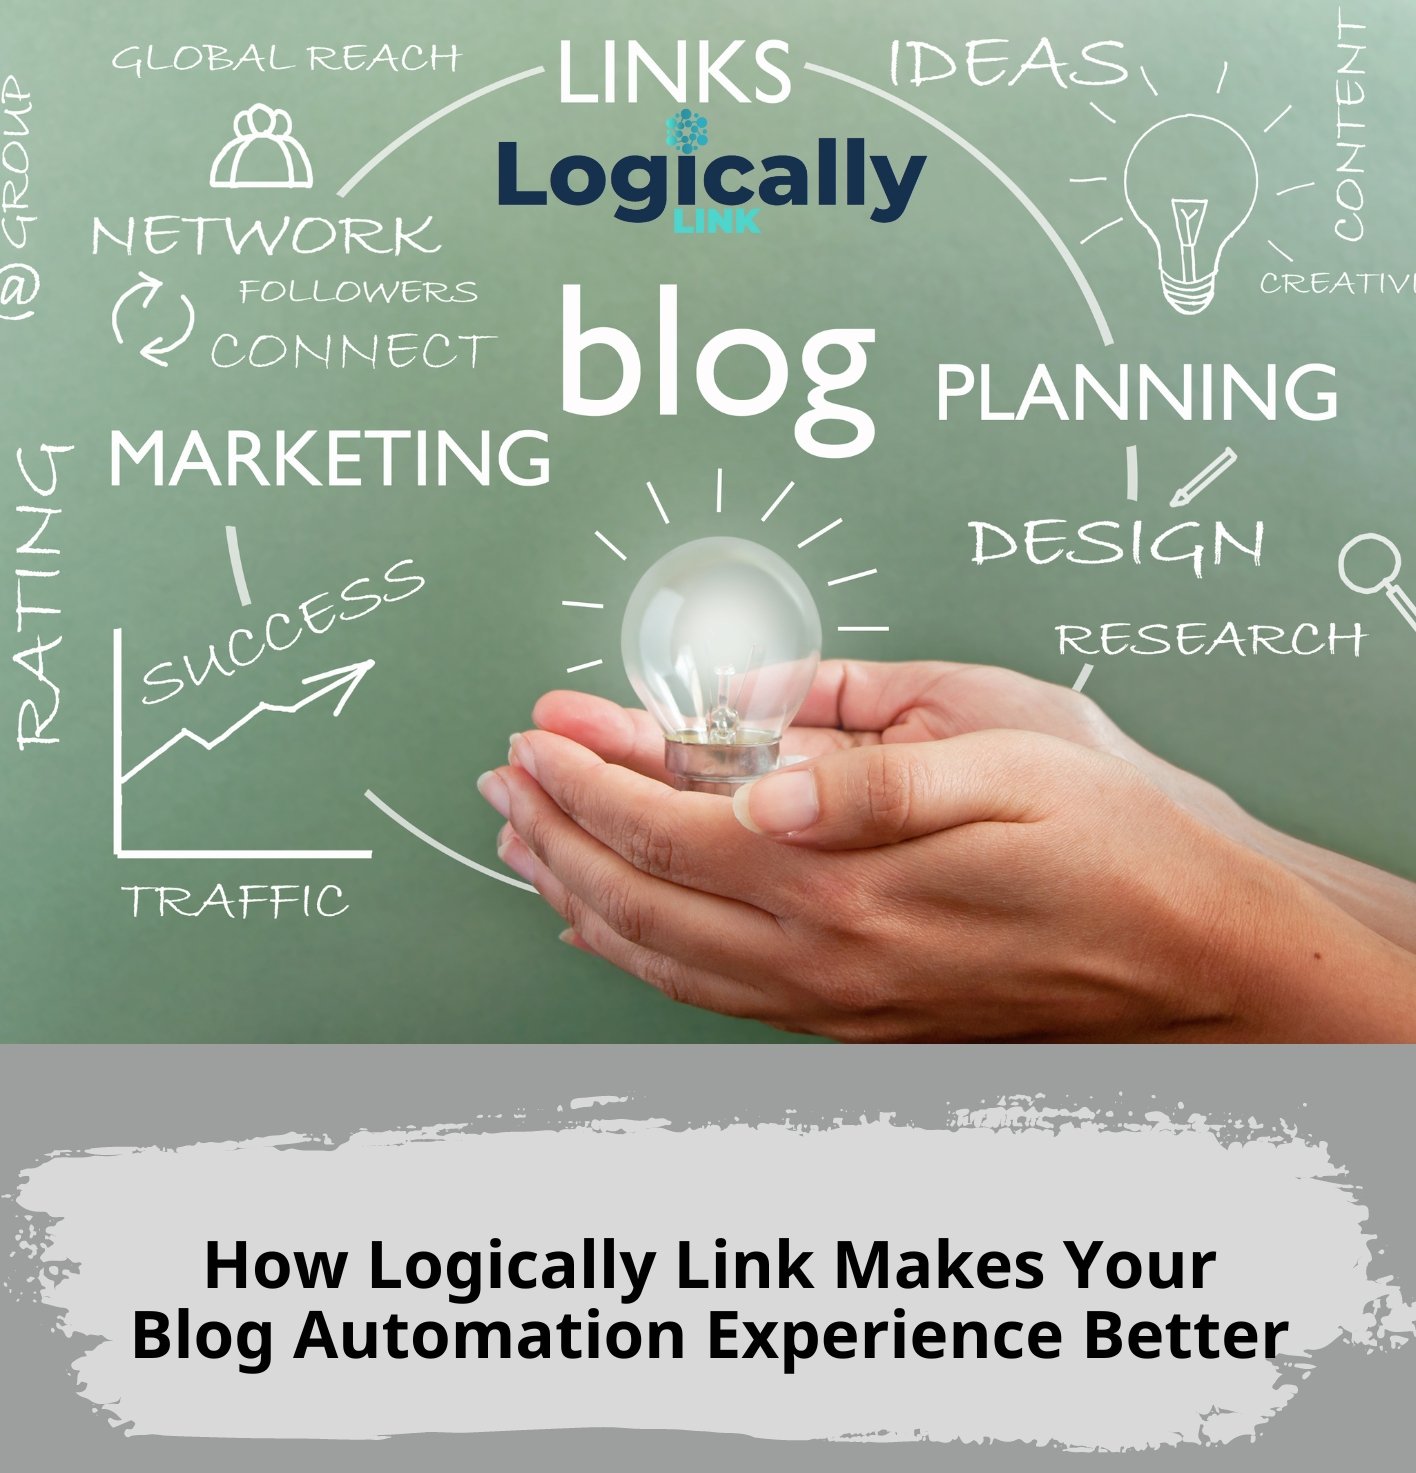 How Logically Link Makes Your Blog Automation Experience Better